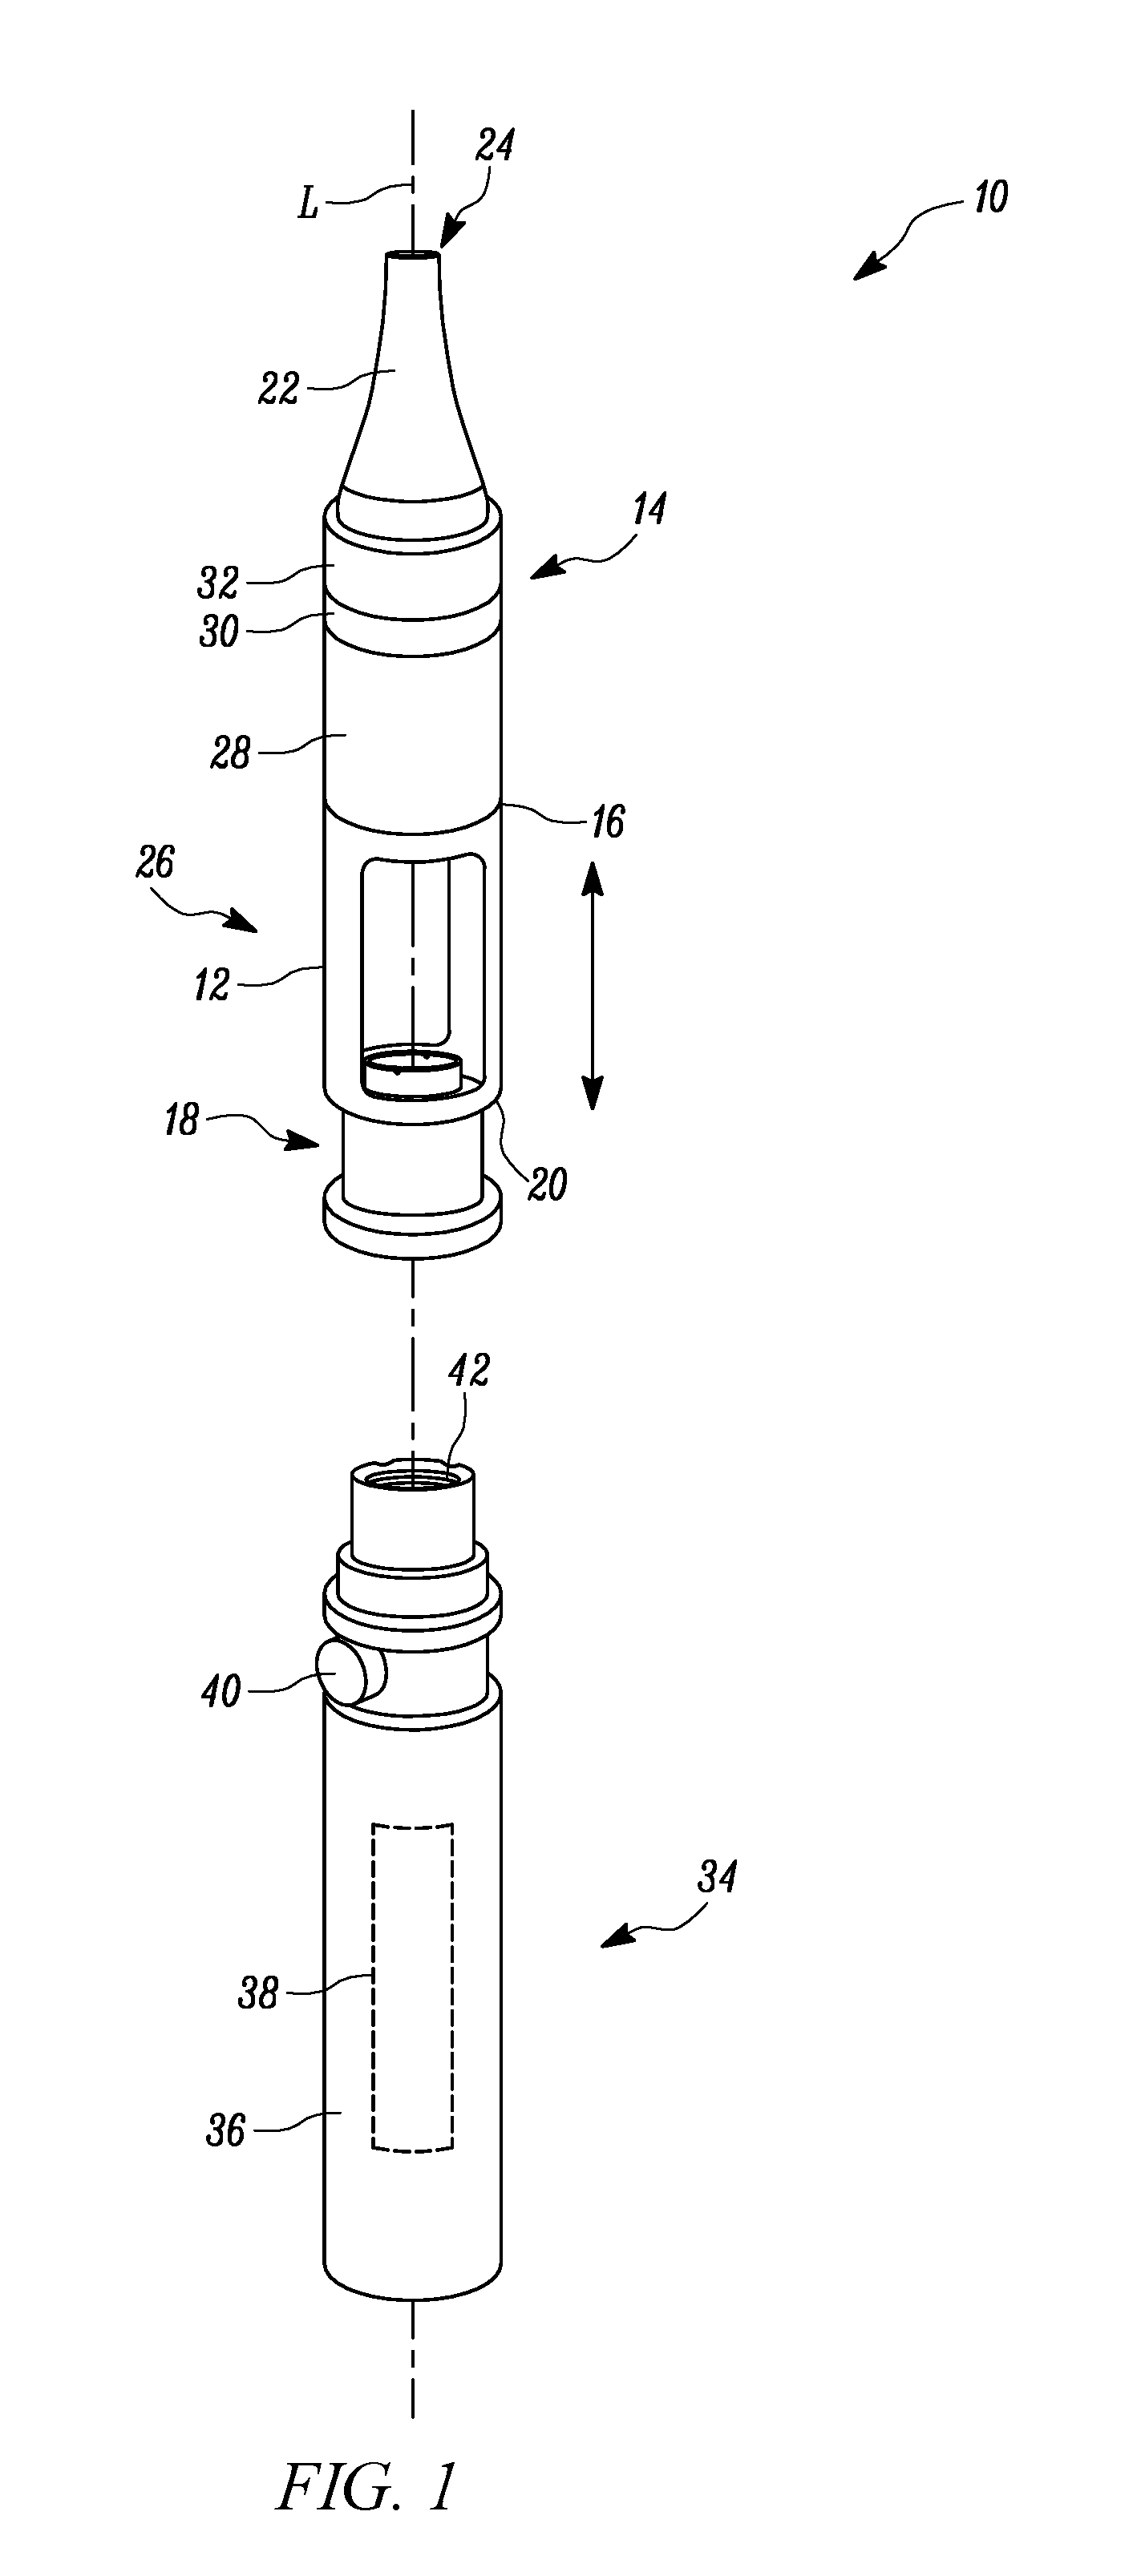 Portable vaporizer for dosing concentrate material